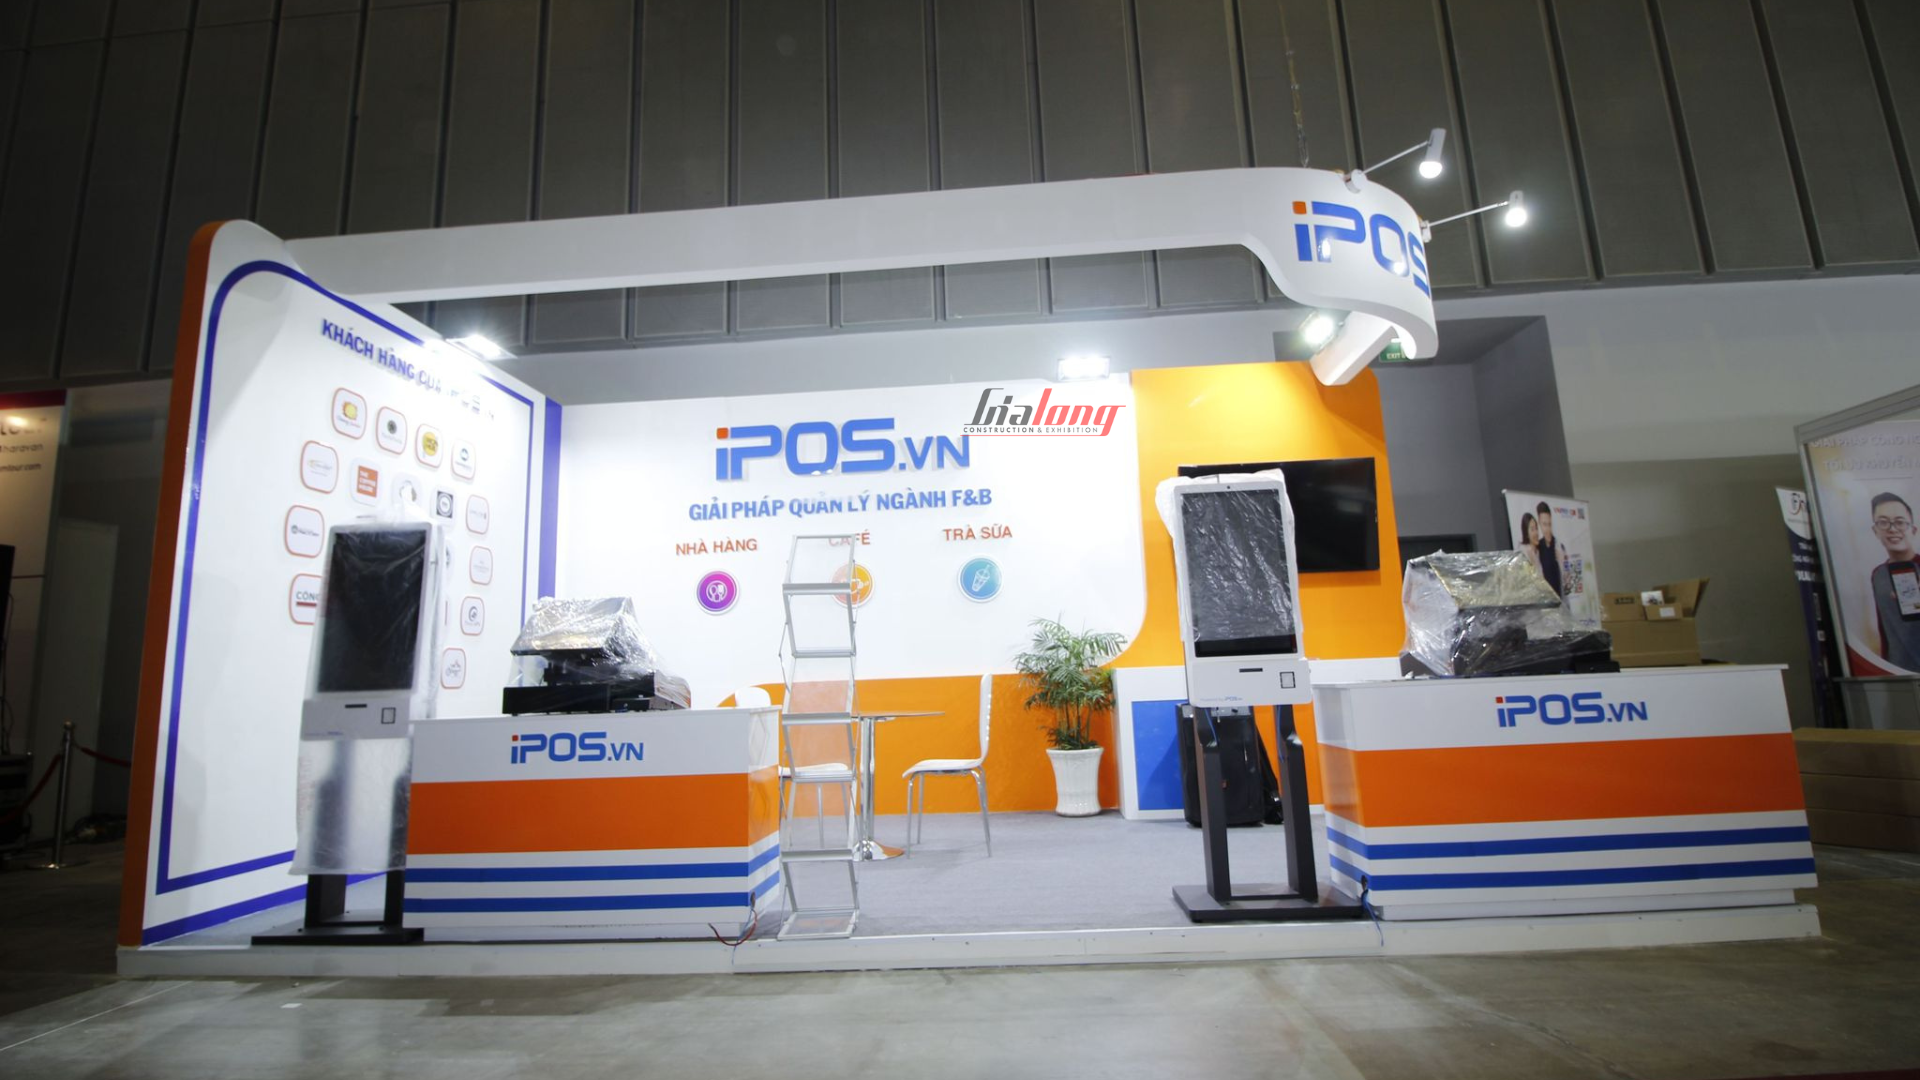 iPOS - The booth was constructed and designed by Gia Long